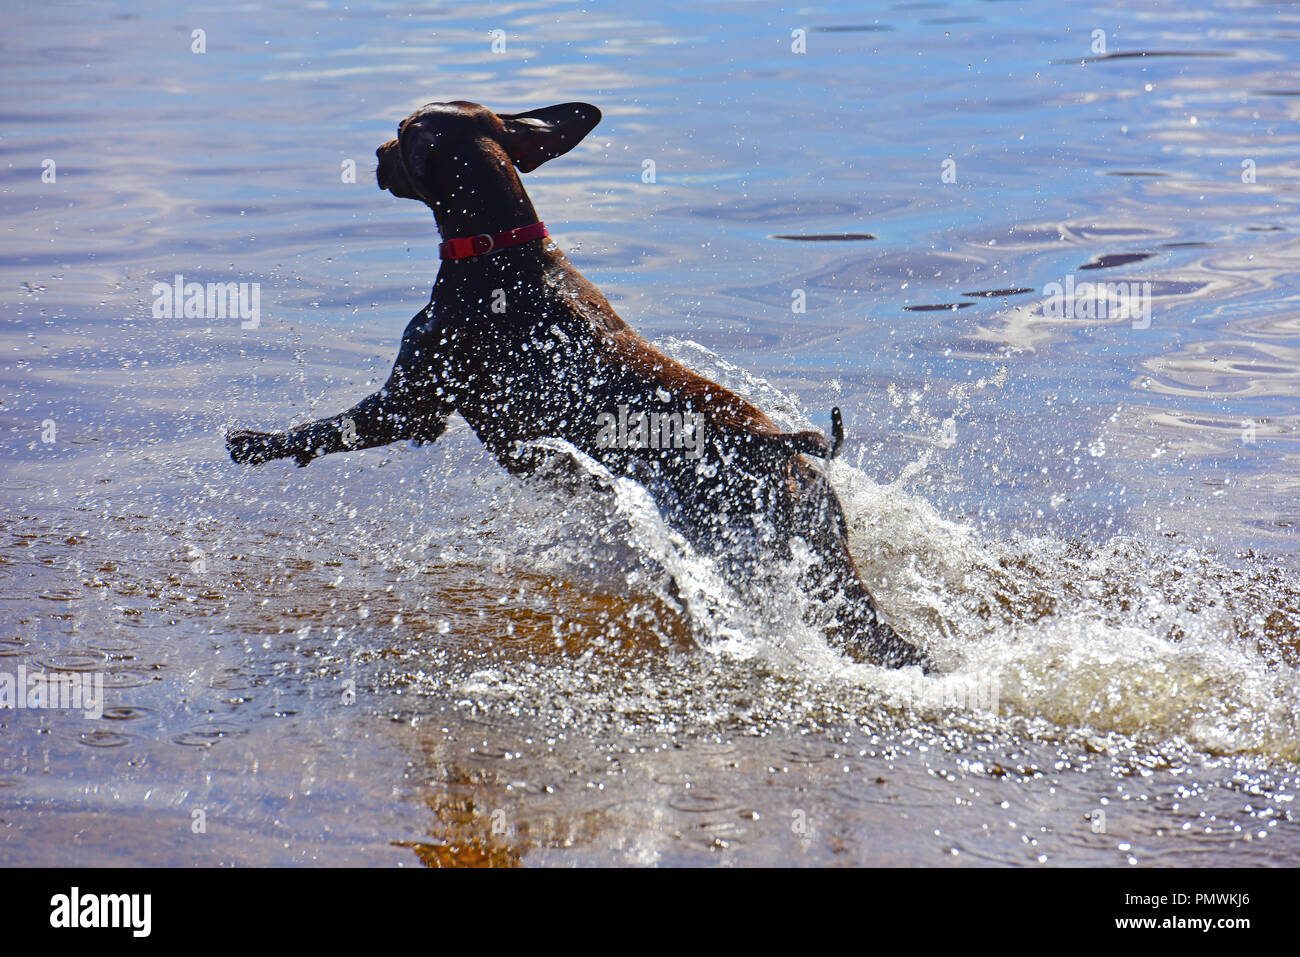 A day out with the family pet Labrador letting it have a swim in a local waterbodies which is it's favourite activity when outdoors. Stock Photo